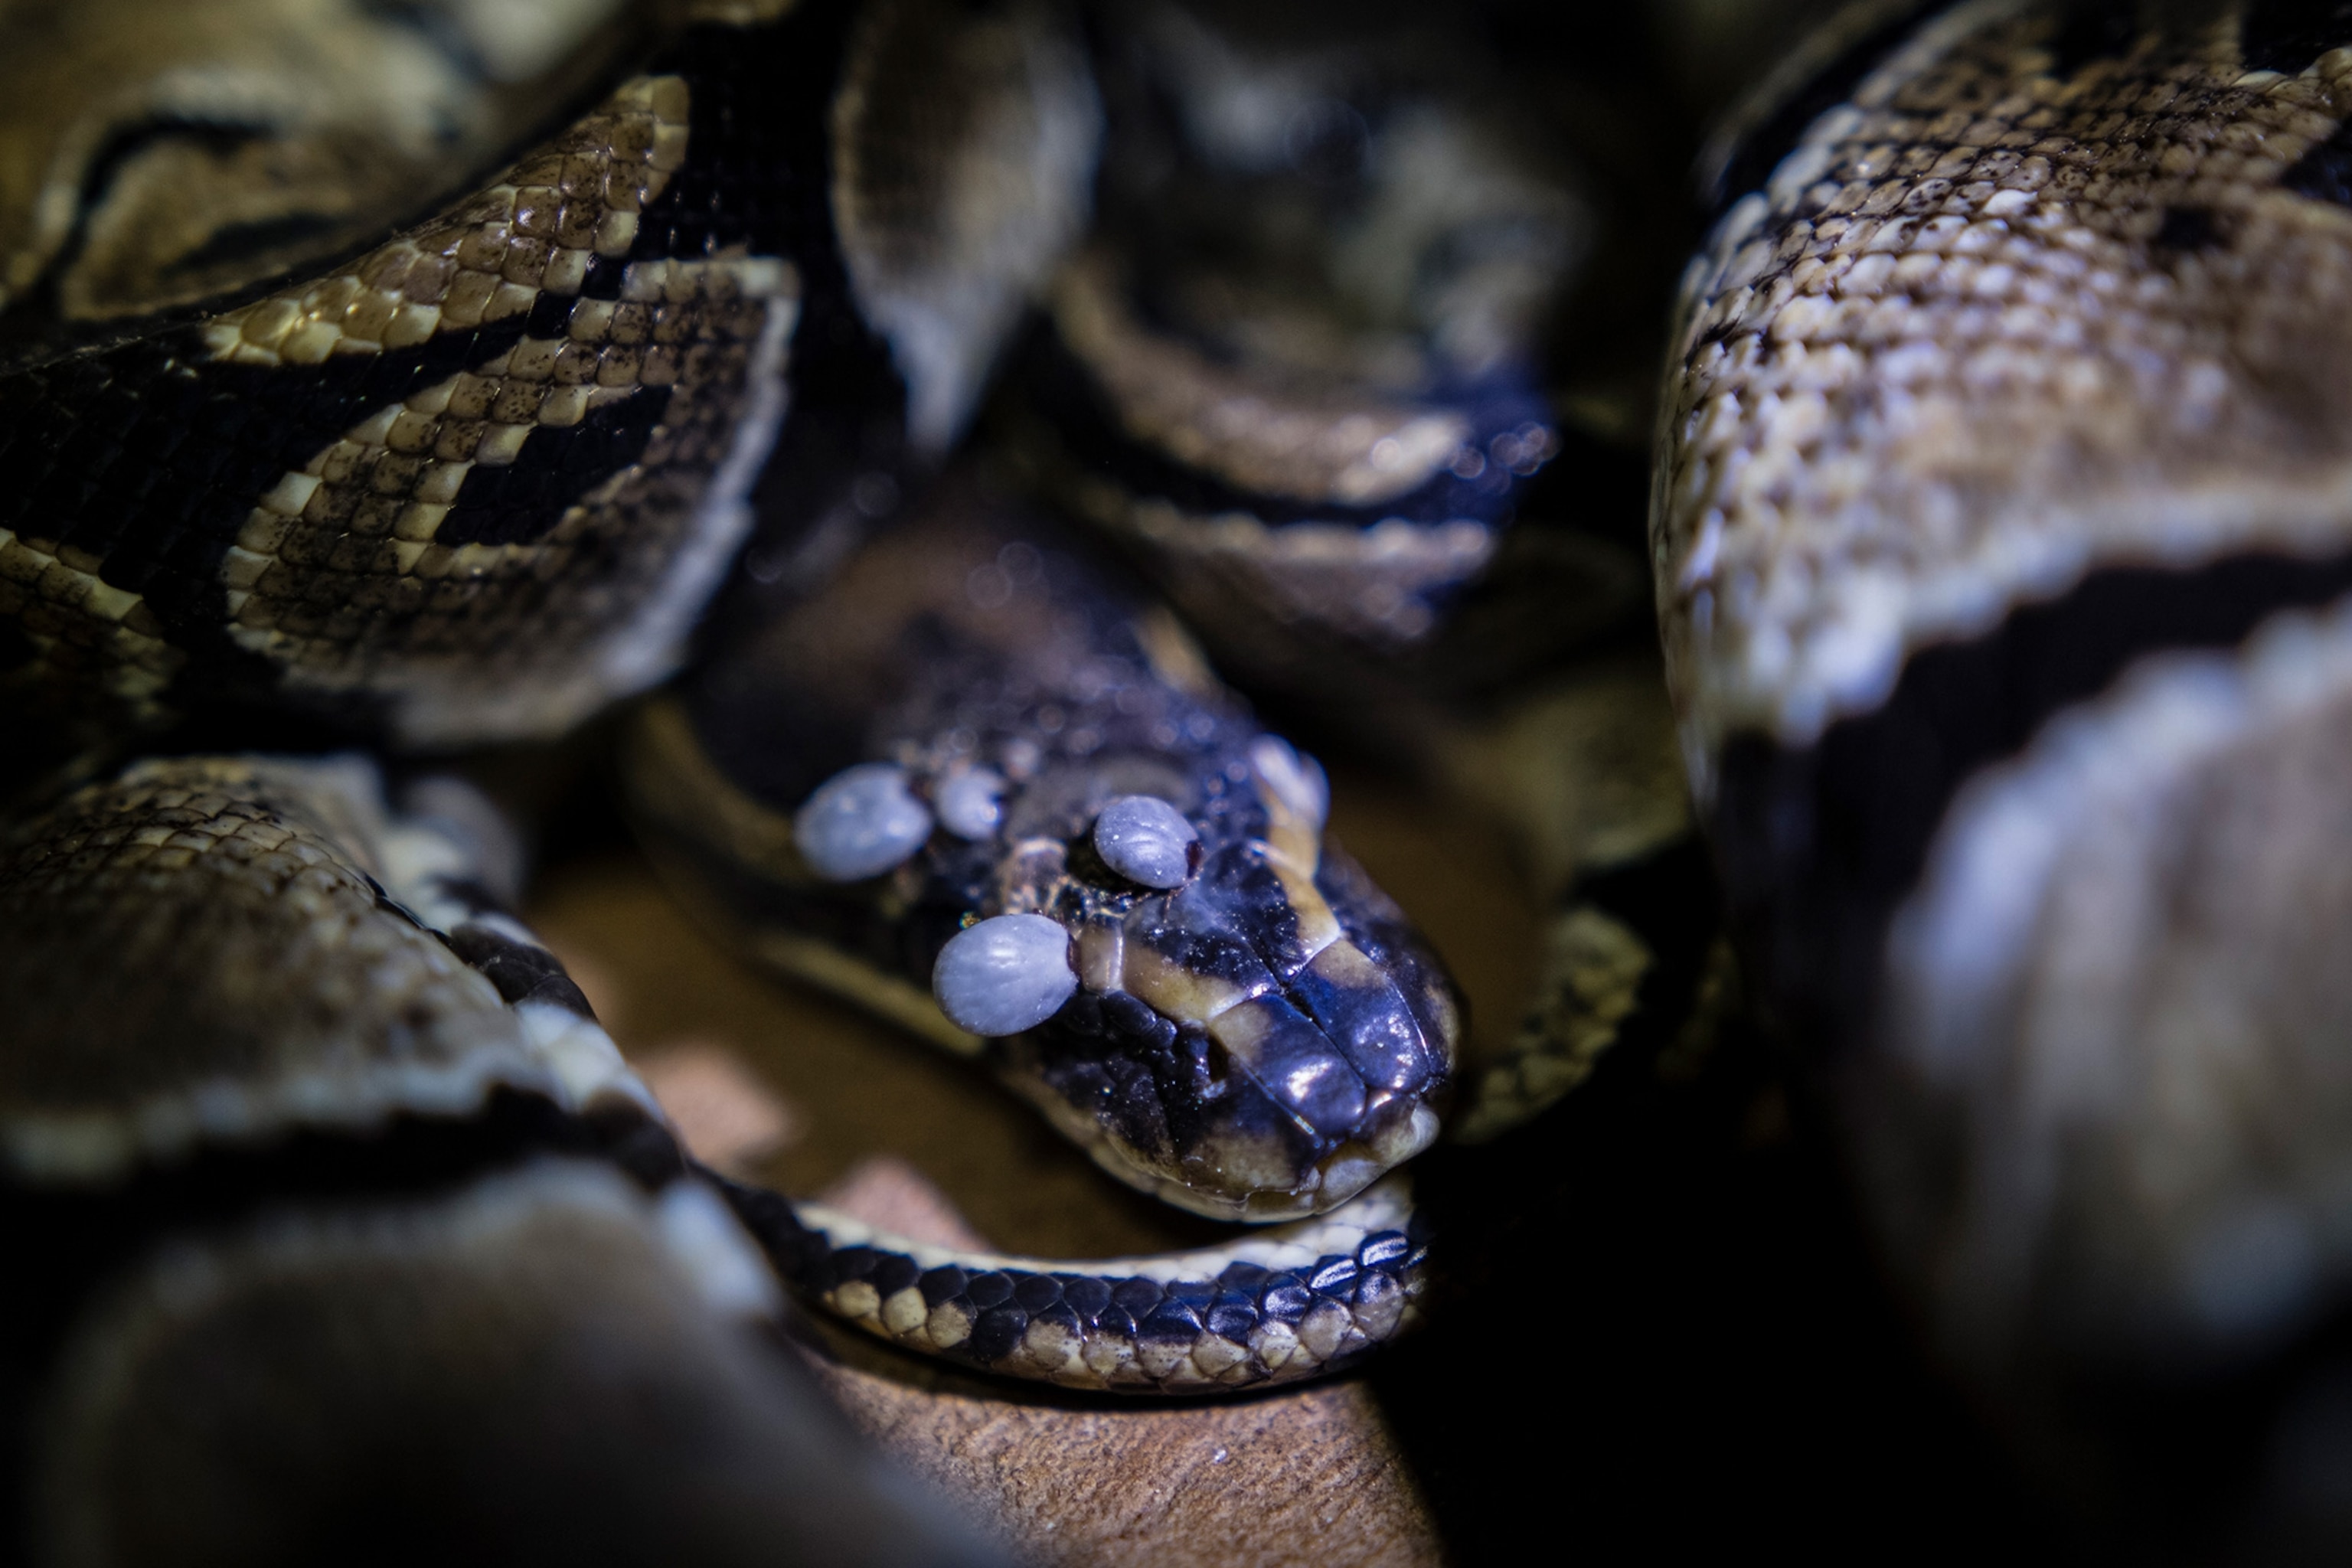 Exports of ball pythons from Togo raise questions about exotic pet trade